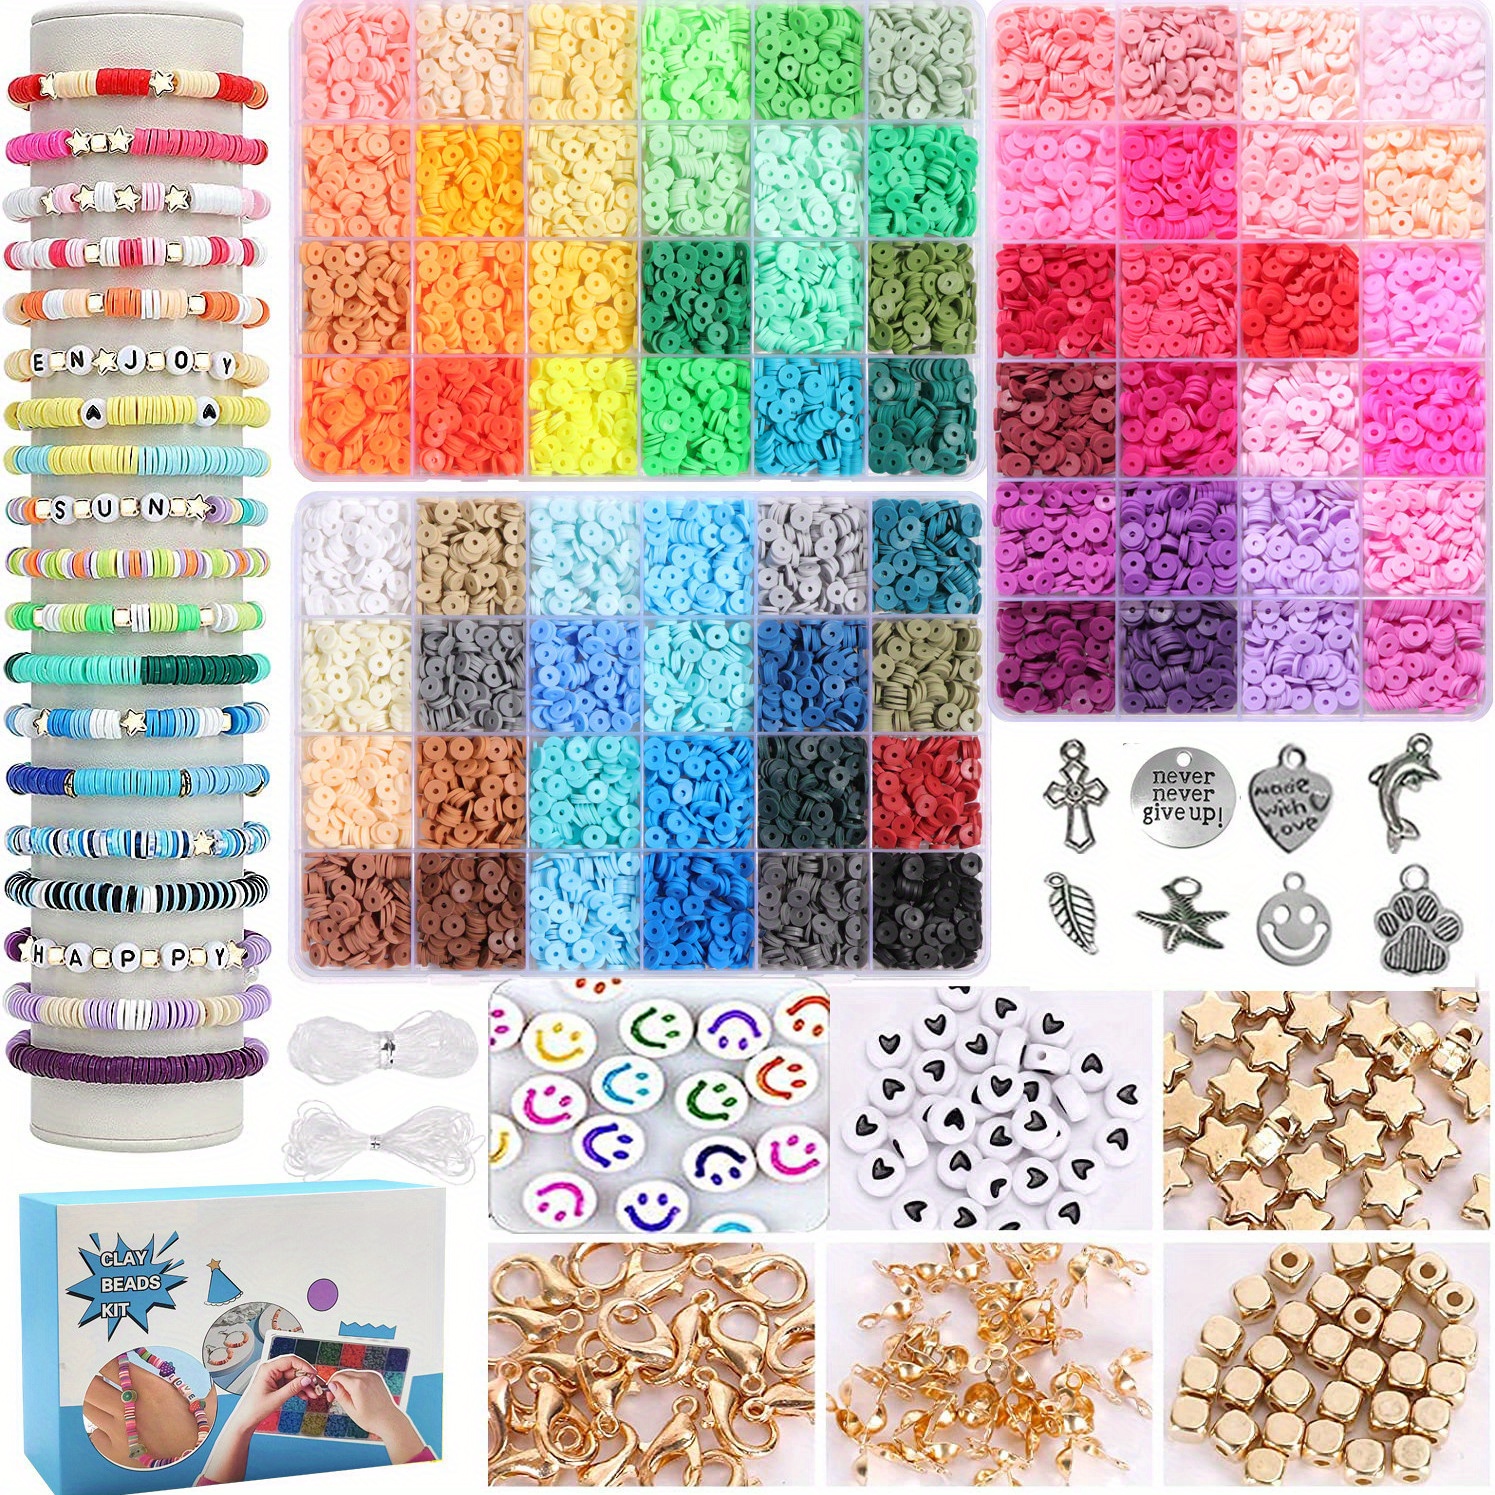 28800pcs 144 Colors Polymer Clay Heishi Beads, Charm Necklace Bracelet  Making Kit, Perfect Gifts Jewelry Making Supplies